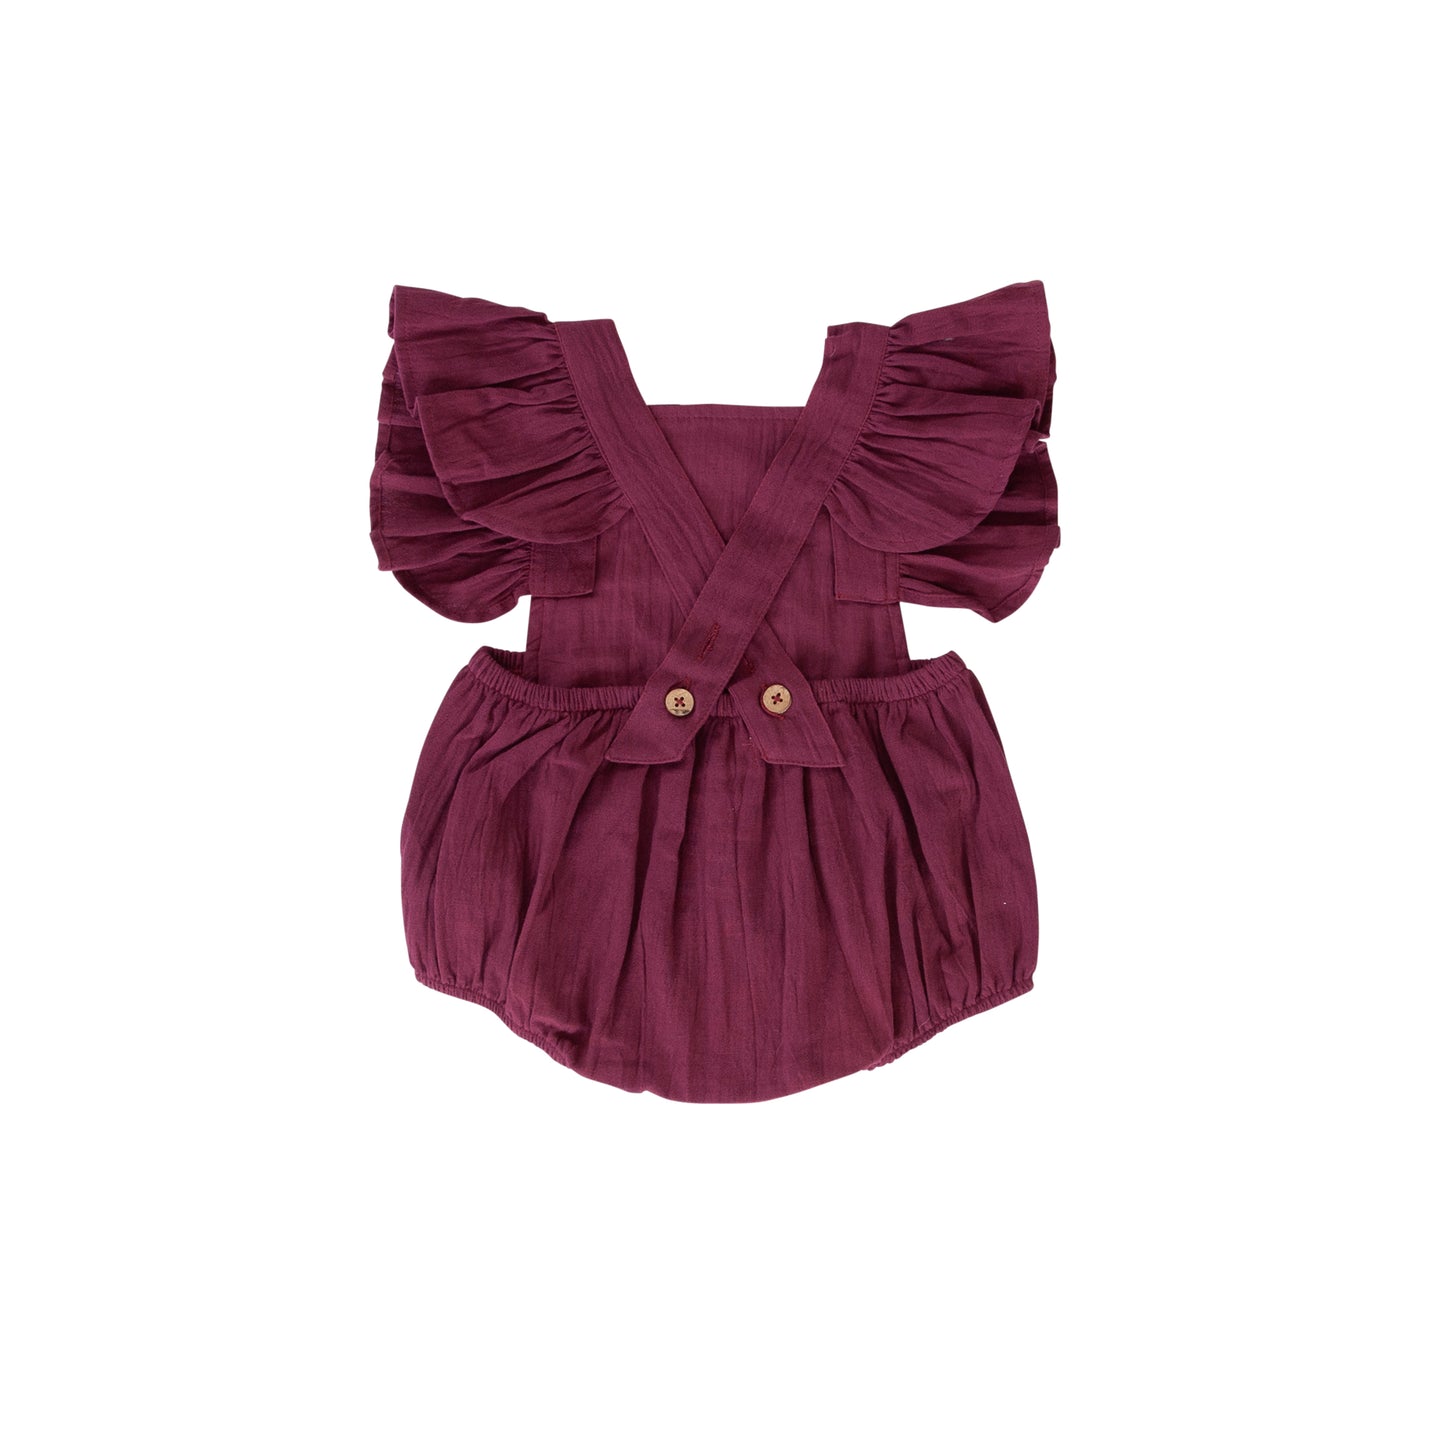 Ling playsuit in hawthorne rose